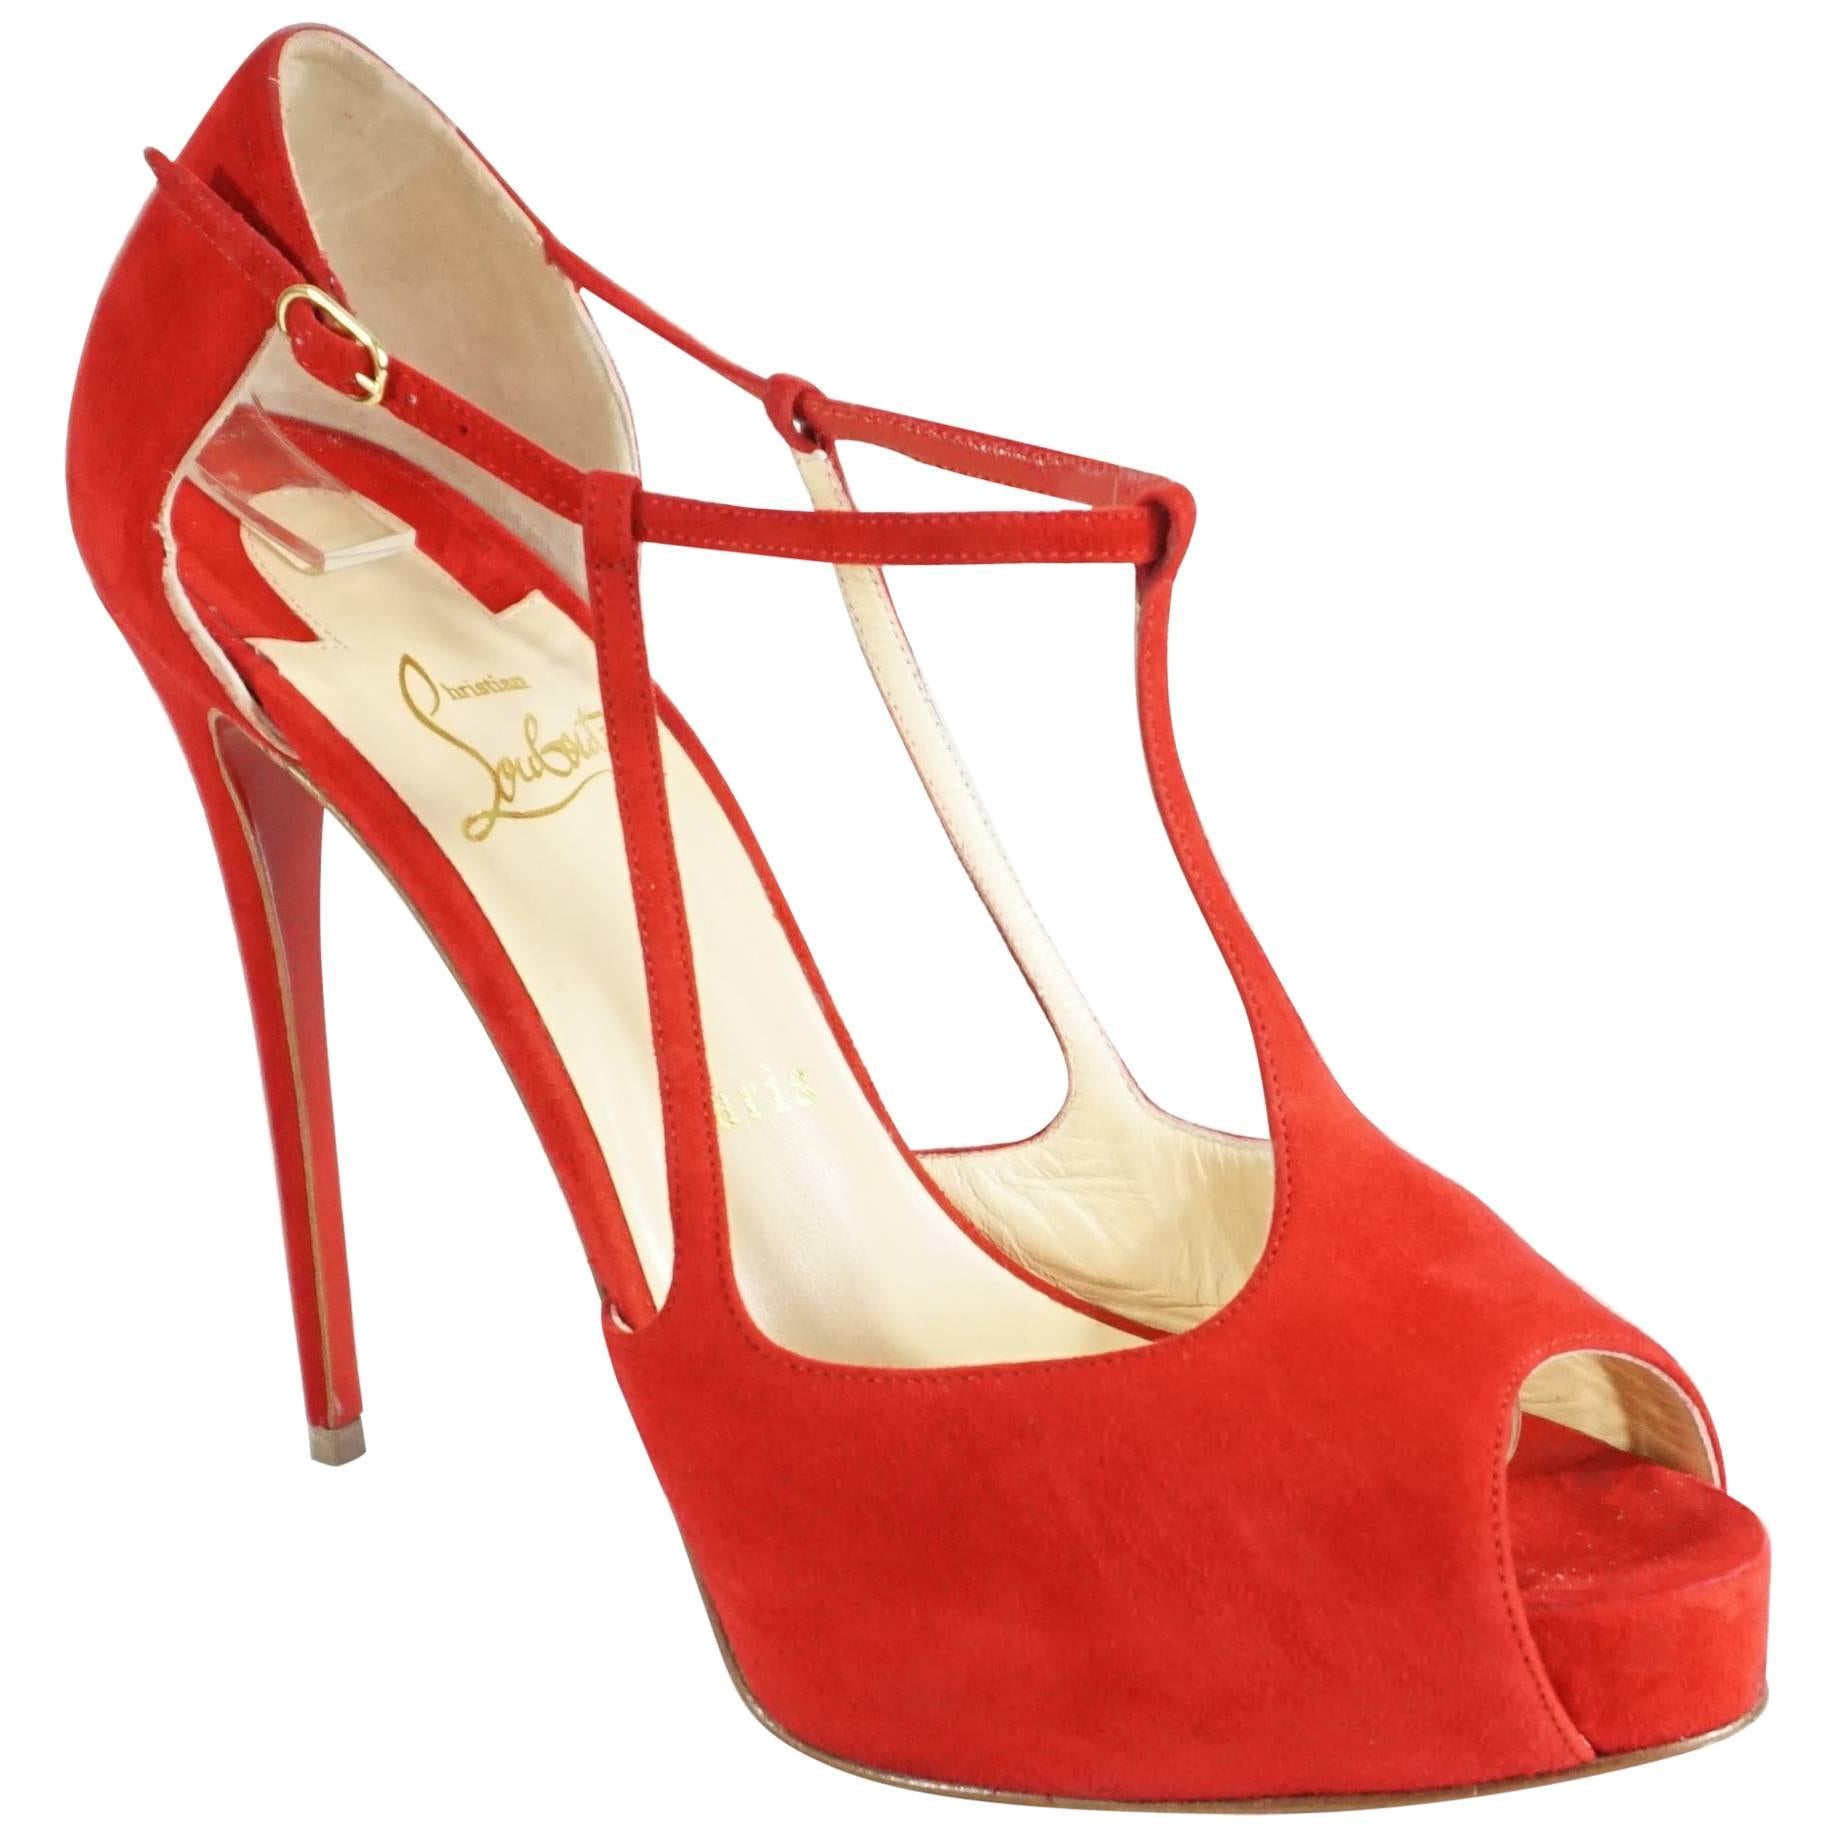 Christian Louboutin Red Suede Strappy Heels - 38